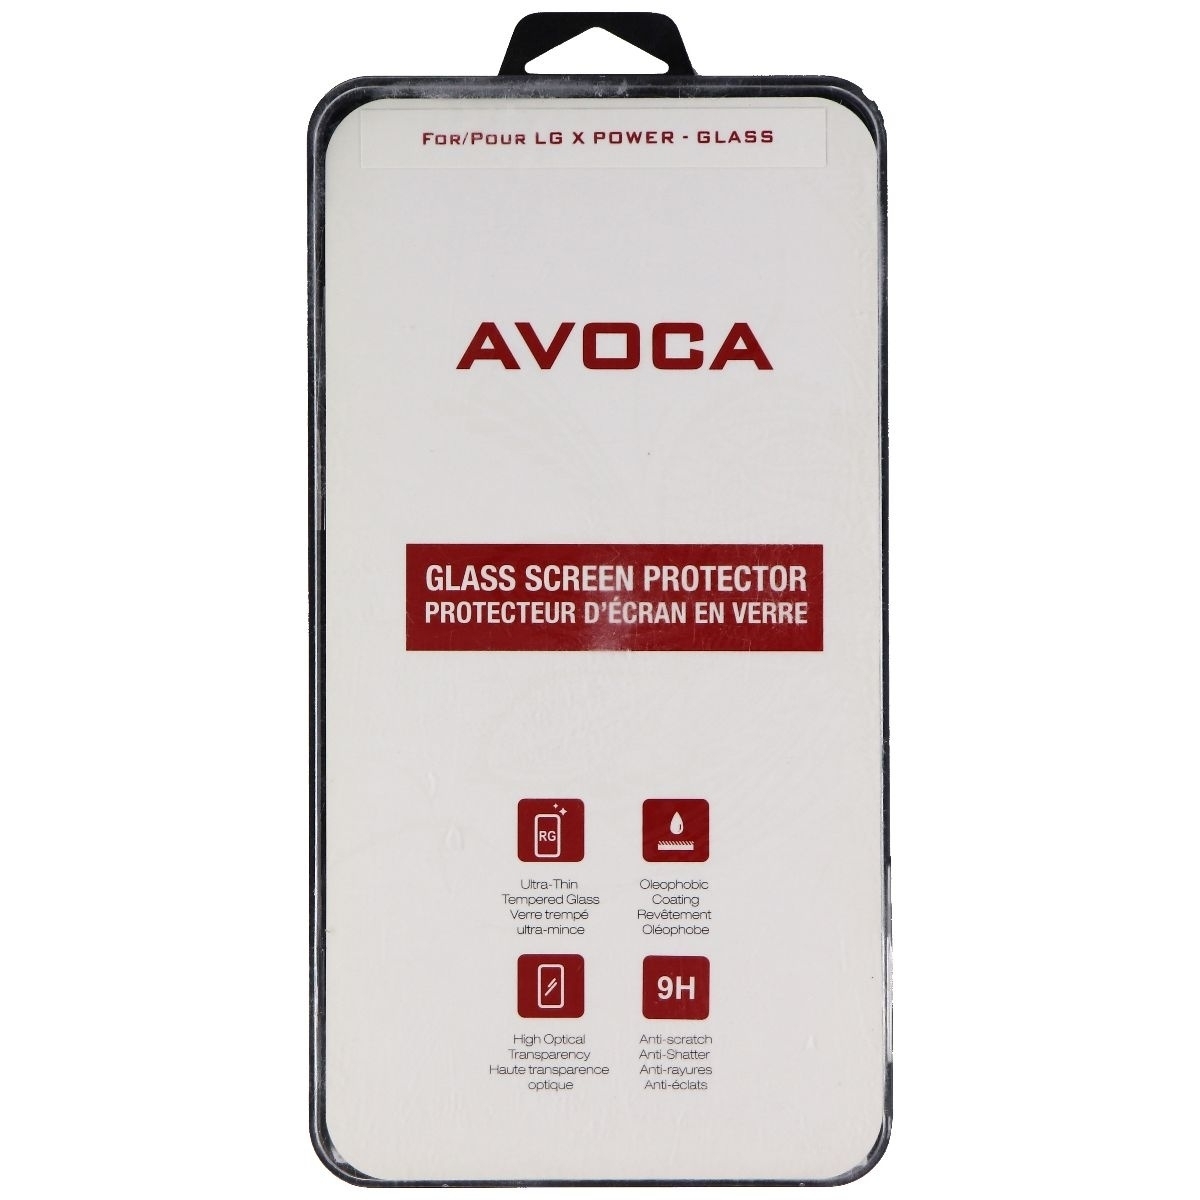 Avoca Glass Screen Protector For LG X Power Smartphone - Clear